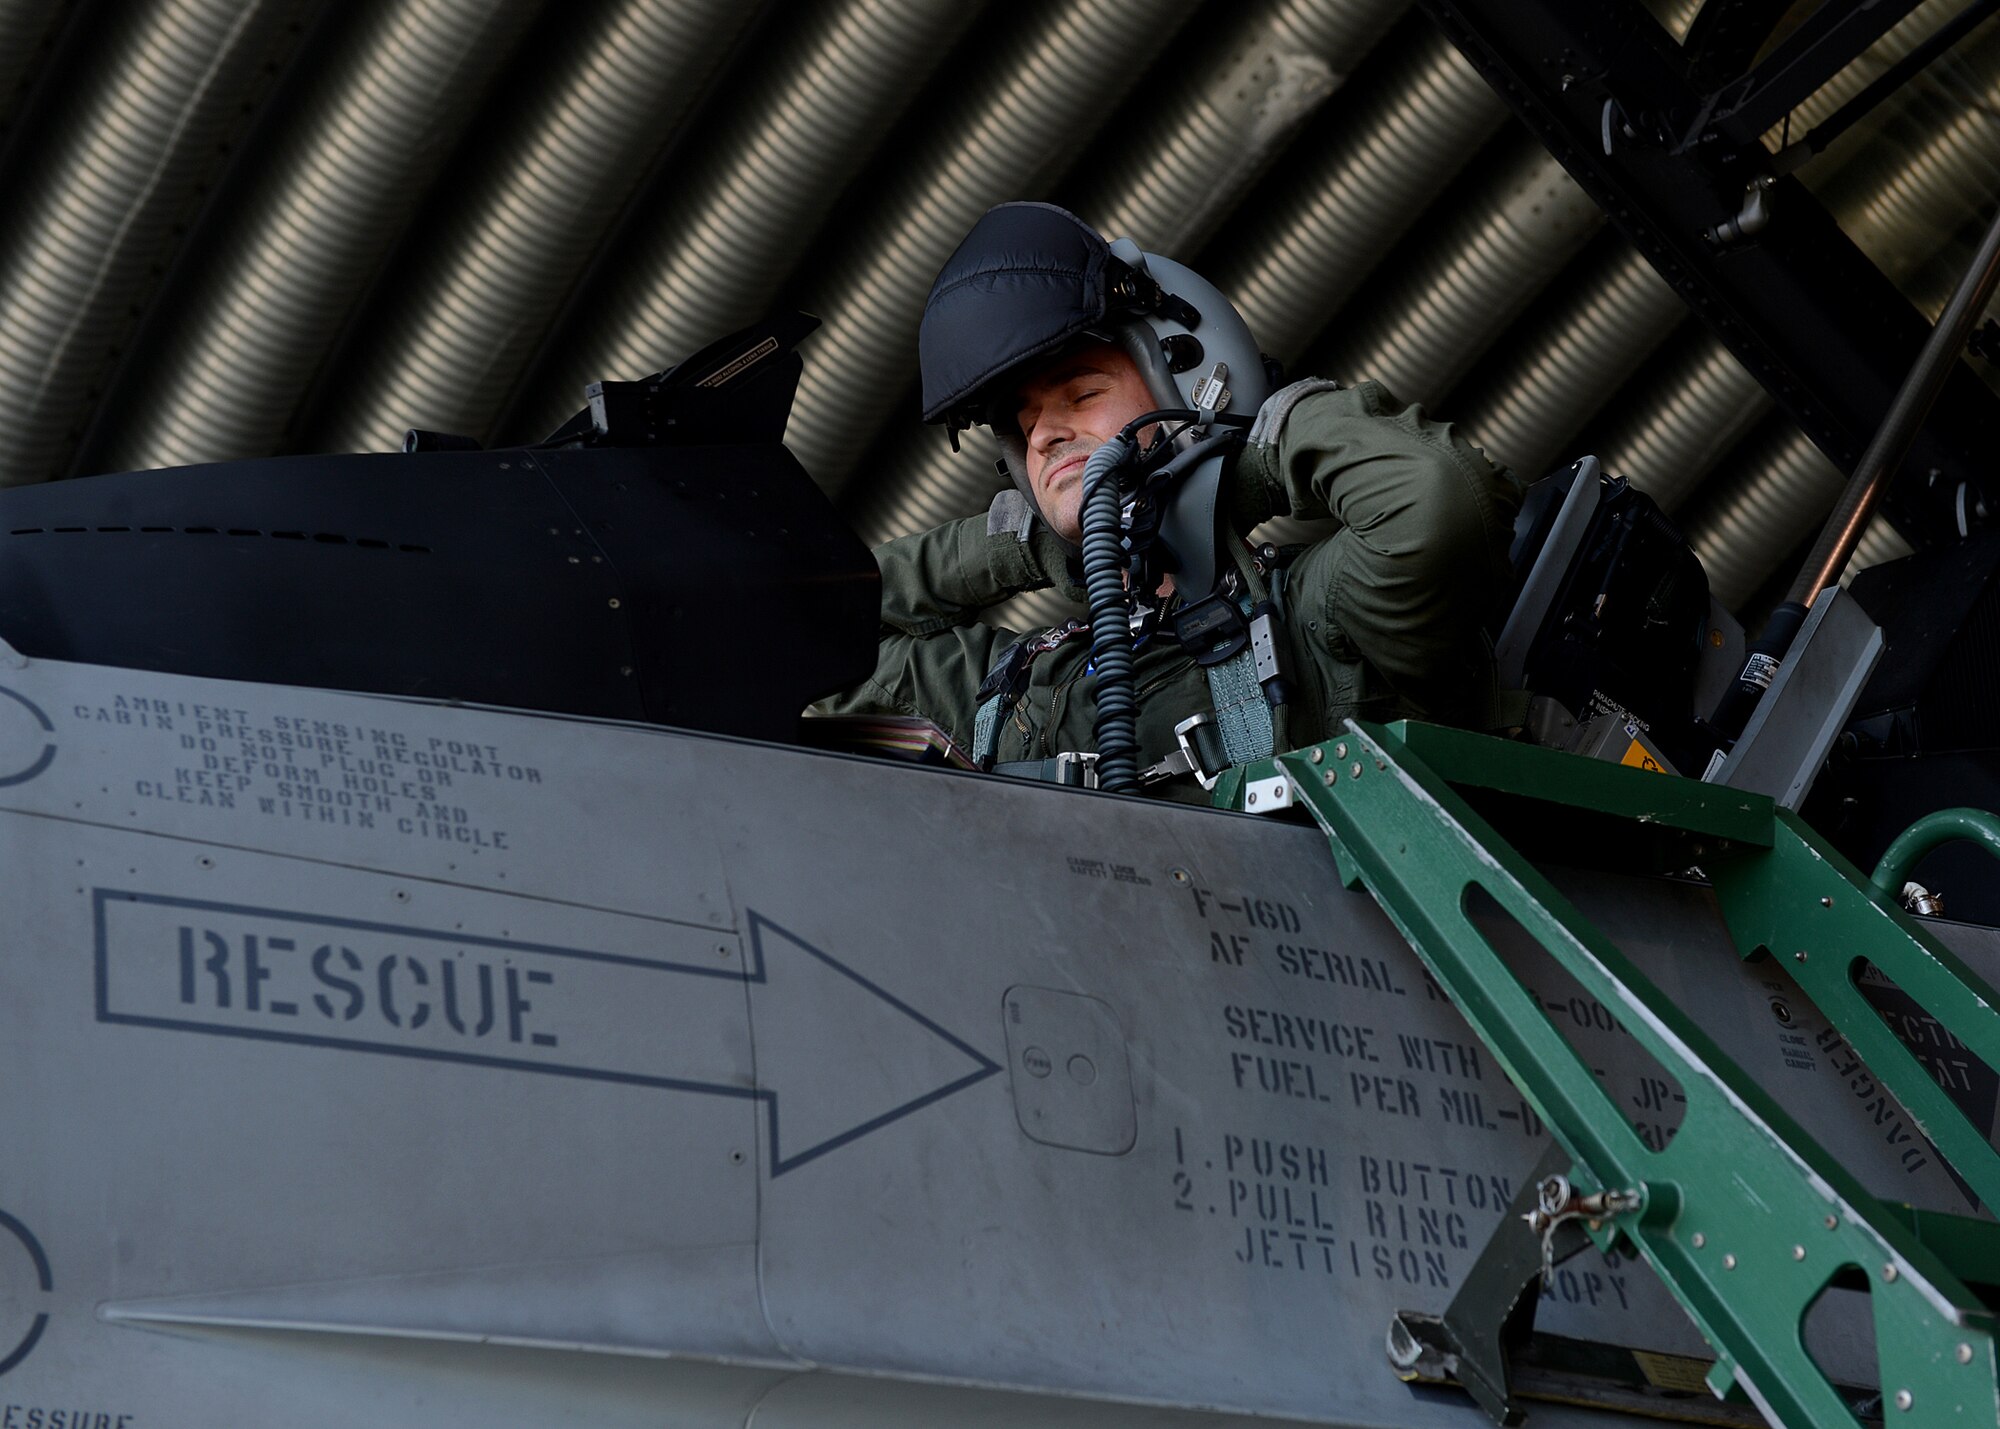 Polish air force 1st Lt. Tomasz Grzybowski, F-16 Fighting Falcon fighter aircraft pilot, puts on his helmet in preparation to fly with U.S. and NATO allies at Lask Air Base, Poland, June 10, 2014 during Exercise EAGLE TALON, a Polish-led combined exercise. This is the first time the U.S. has participated in this exercise, which trains pilots to attack and defend targets with NATO allies. Training together in partnership enhances understanding of each other’s tactics and procedures for future combined operations. (U.S. Air Force photo by Airman 1st Class Kyle Gese/Released)